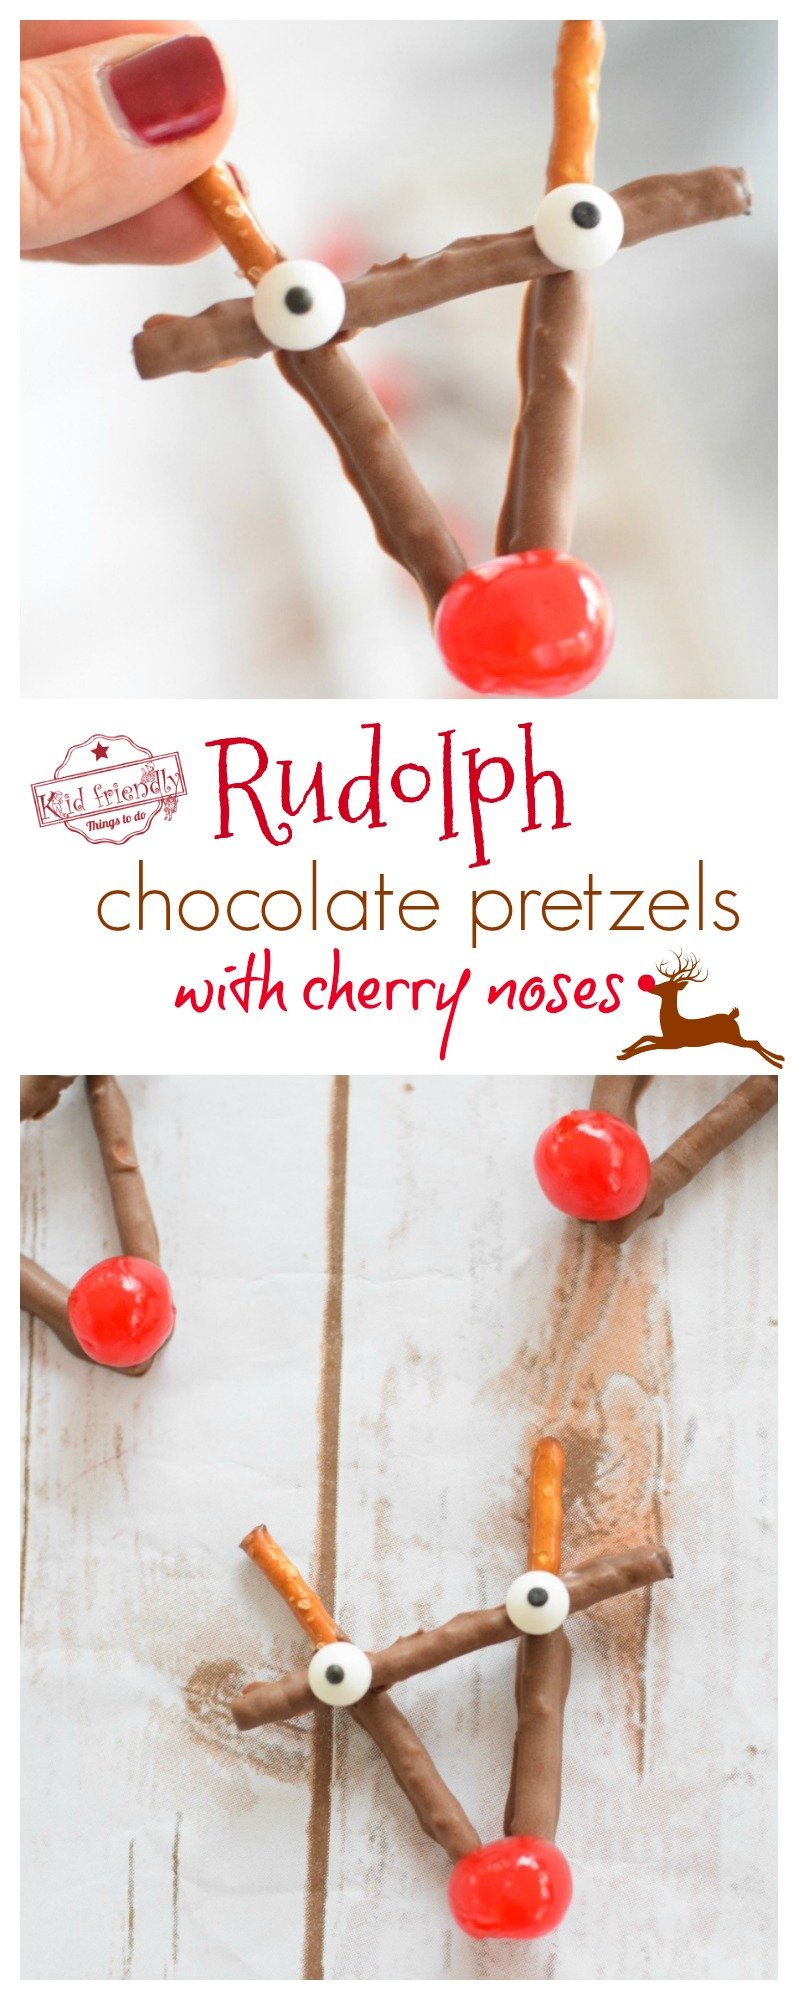 Rudolph Chocolate and Cherry Pretzel Treats for Christmas - easy to make. A fun red cherry nose Rudolph treat for the kids and yummy for everyone! www.kidfriendlythingstodo.com